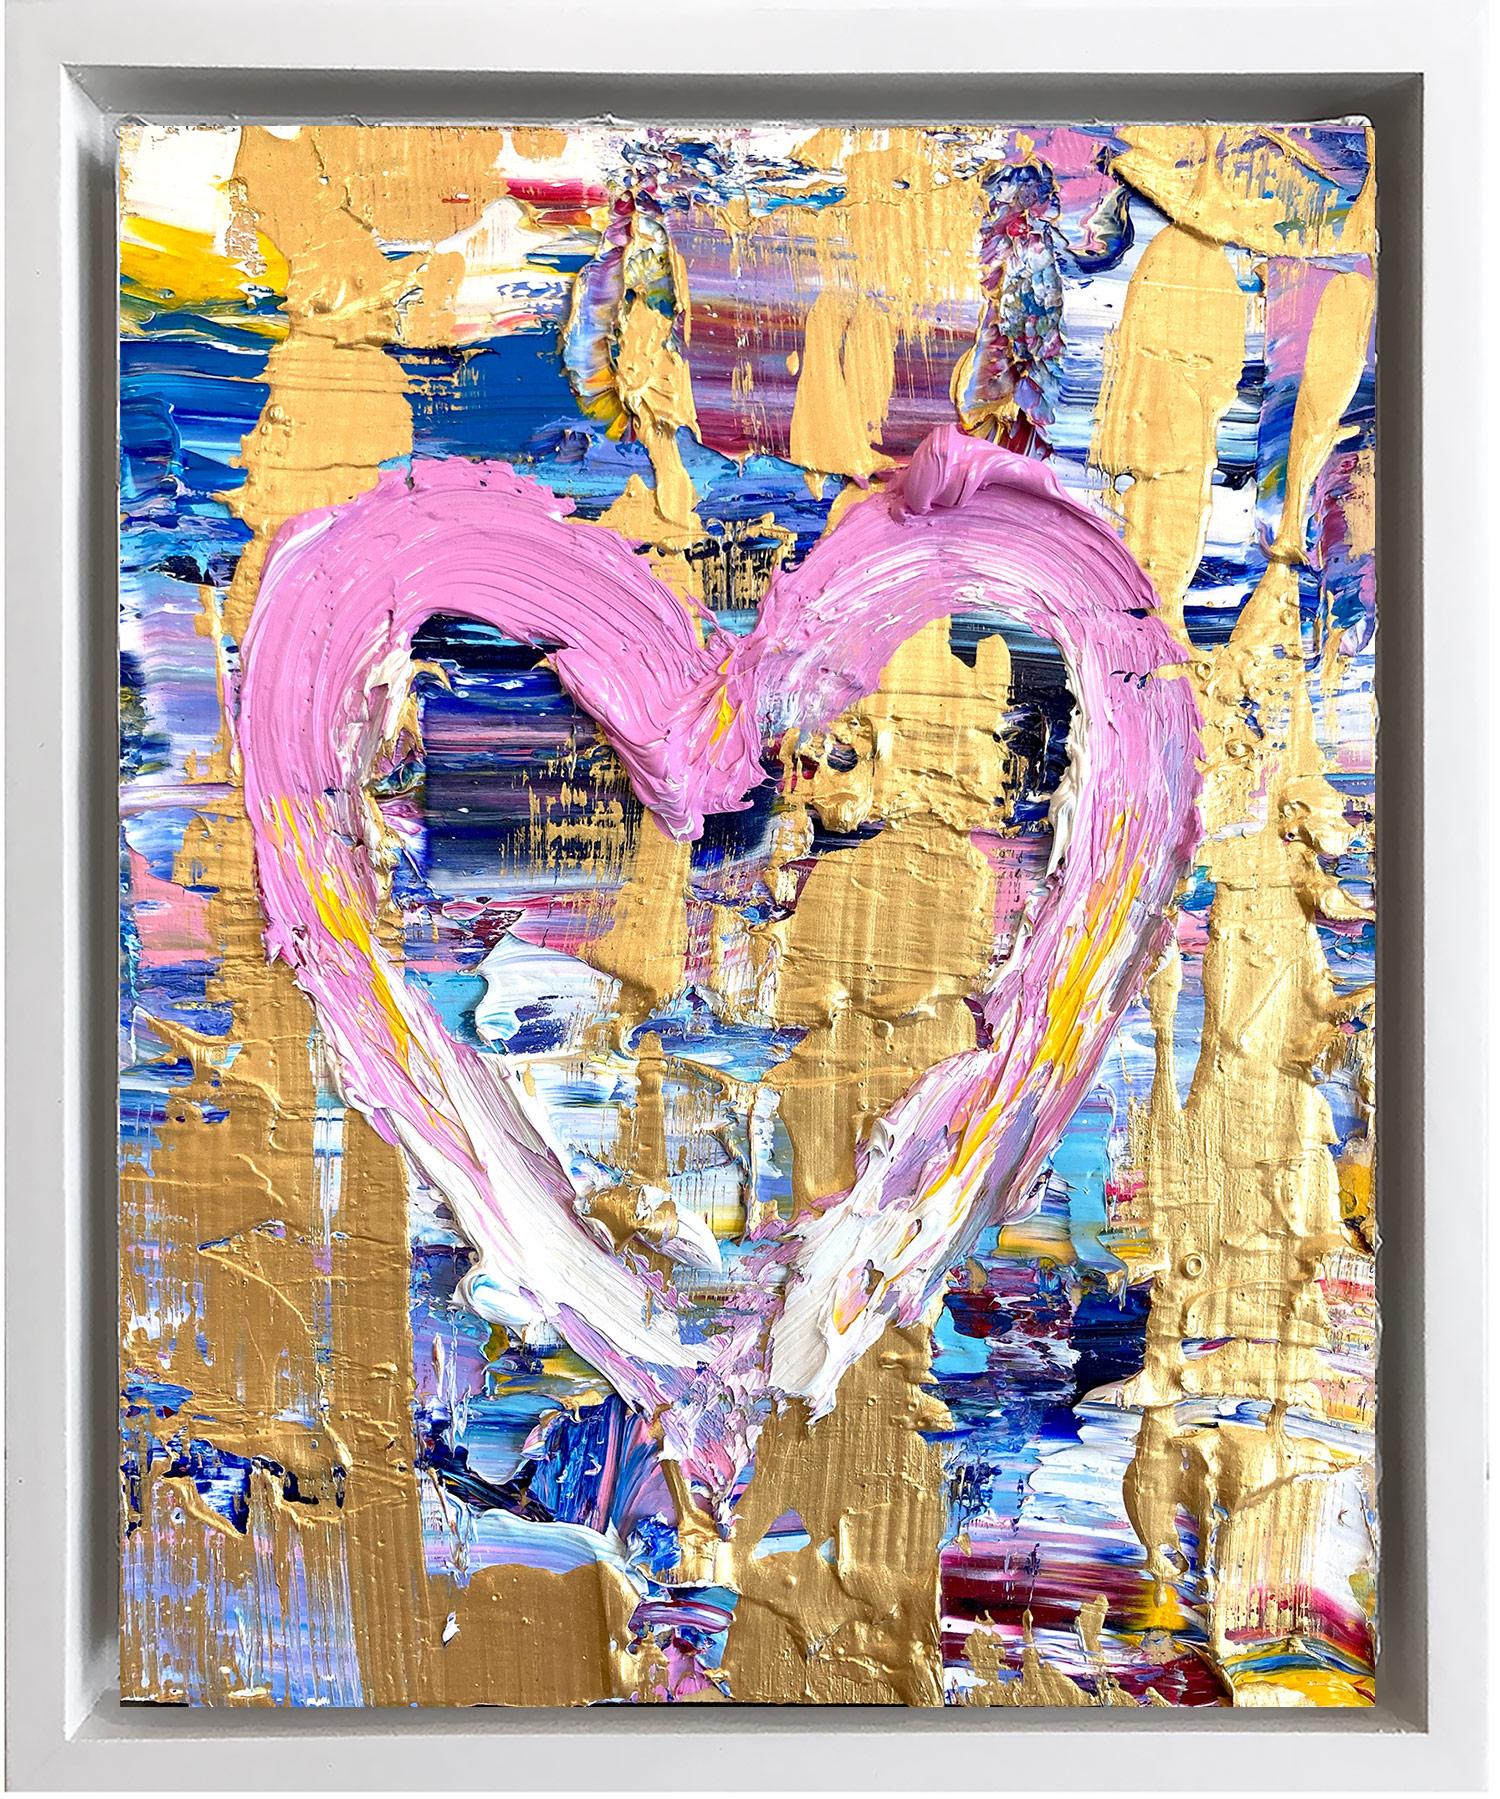 Cindy Shaoul Abstract Painting - "My Renaissance Heart" Contemporary Pop Art Oil Painting with Floater Frame